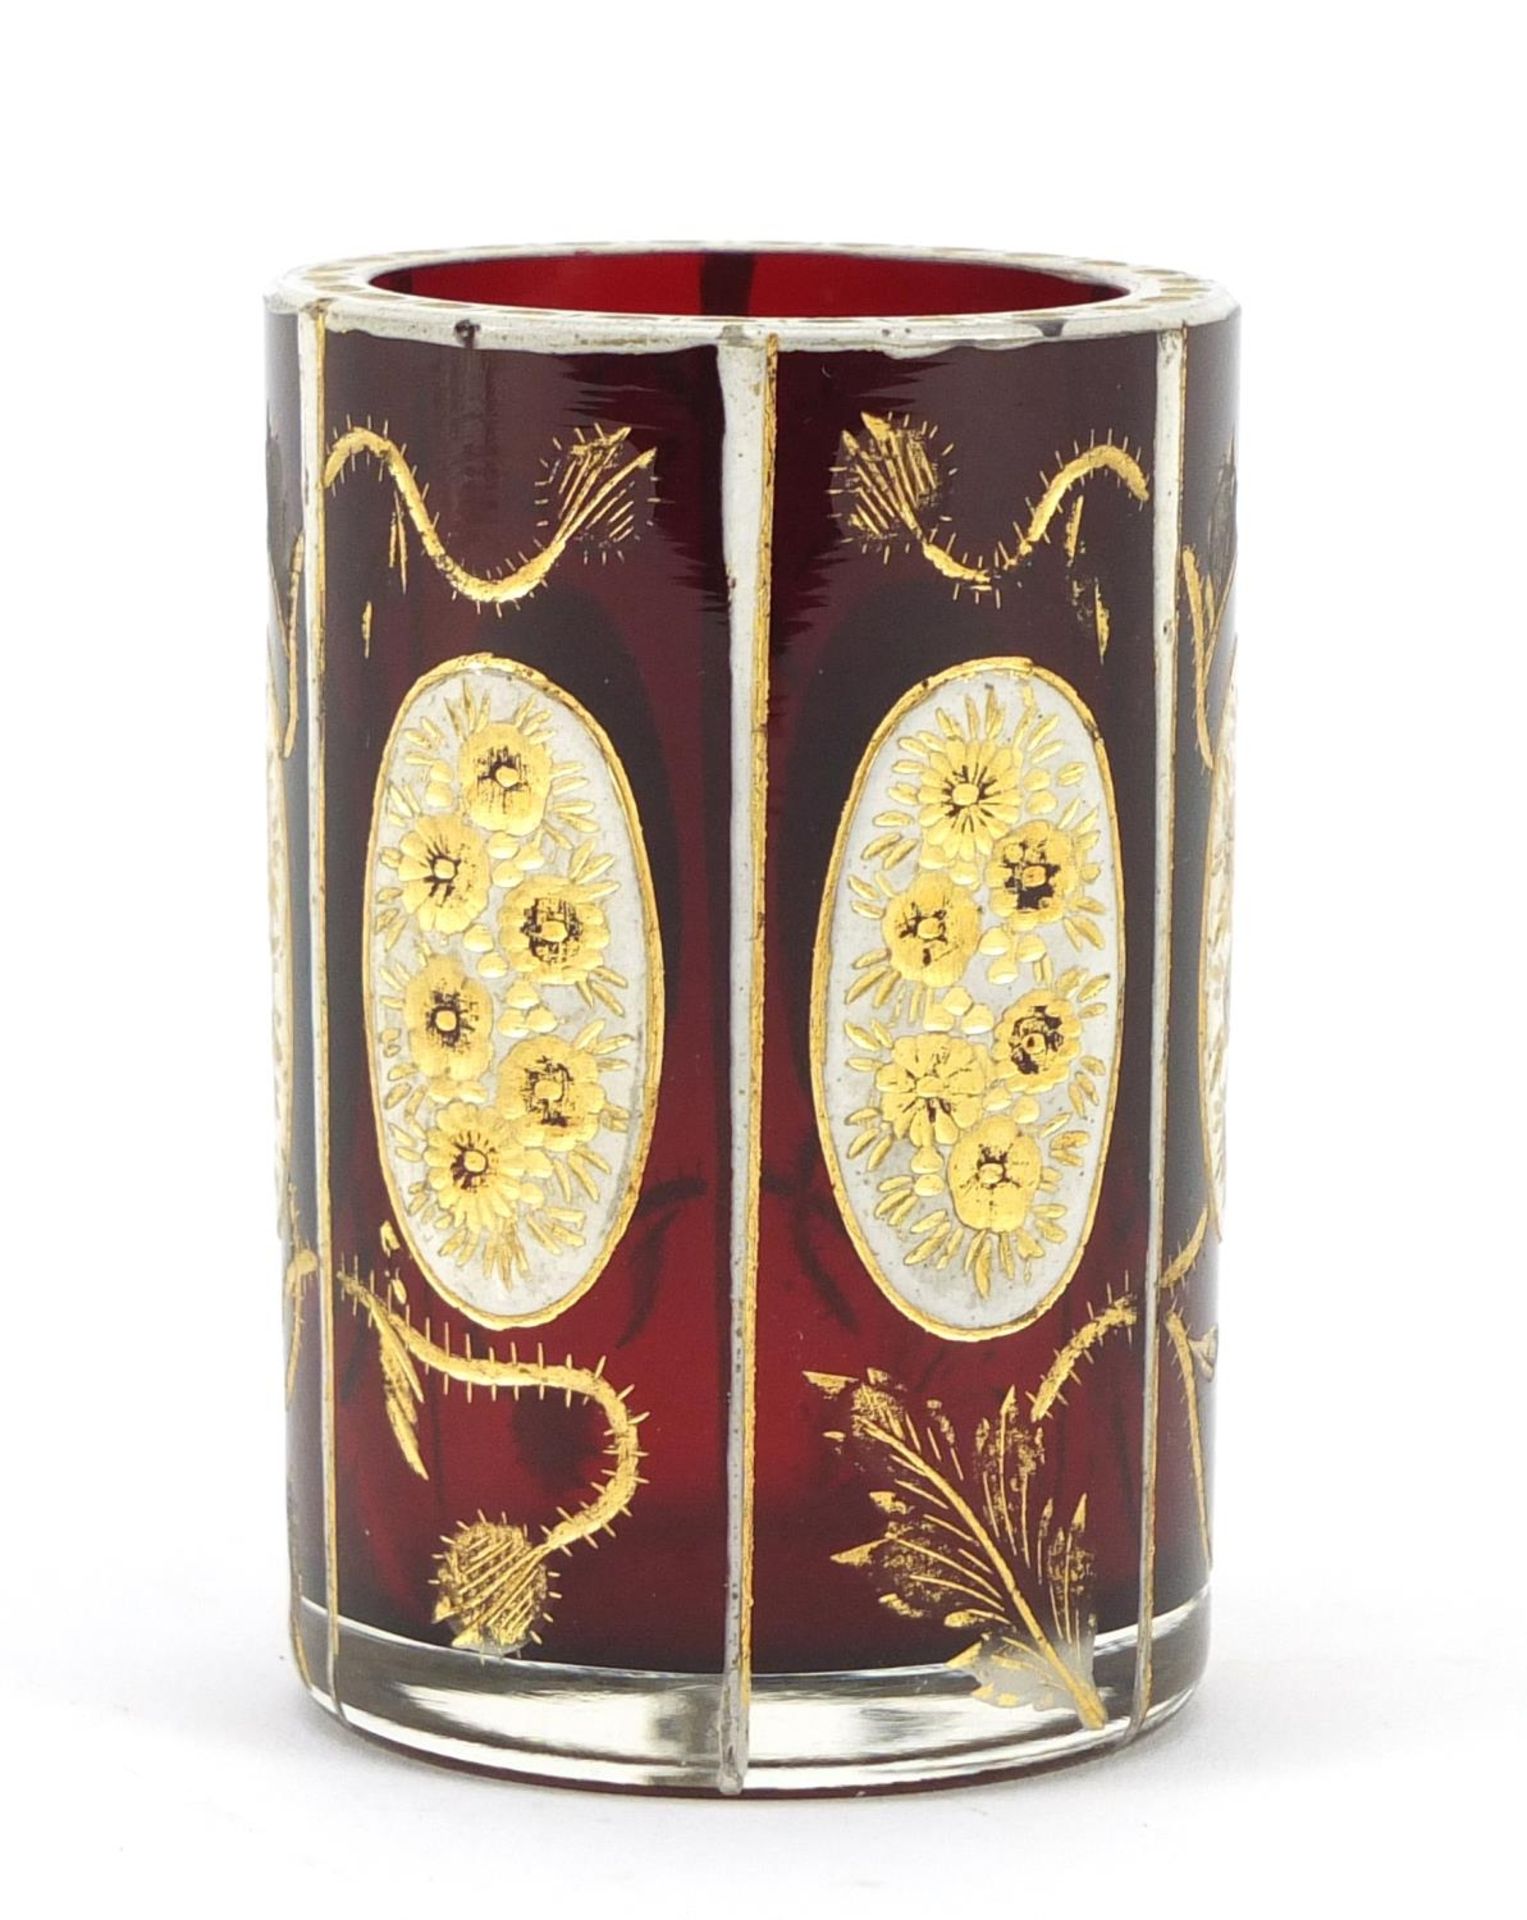 Bohemian ruby glass vase, gilded with flowers and thistles, 7.5cm high There are a few small chips - Image 2 of 8